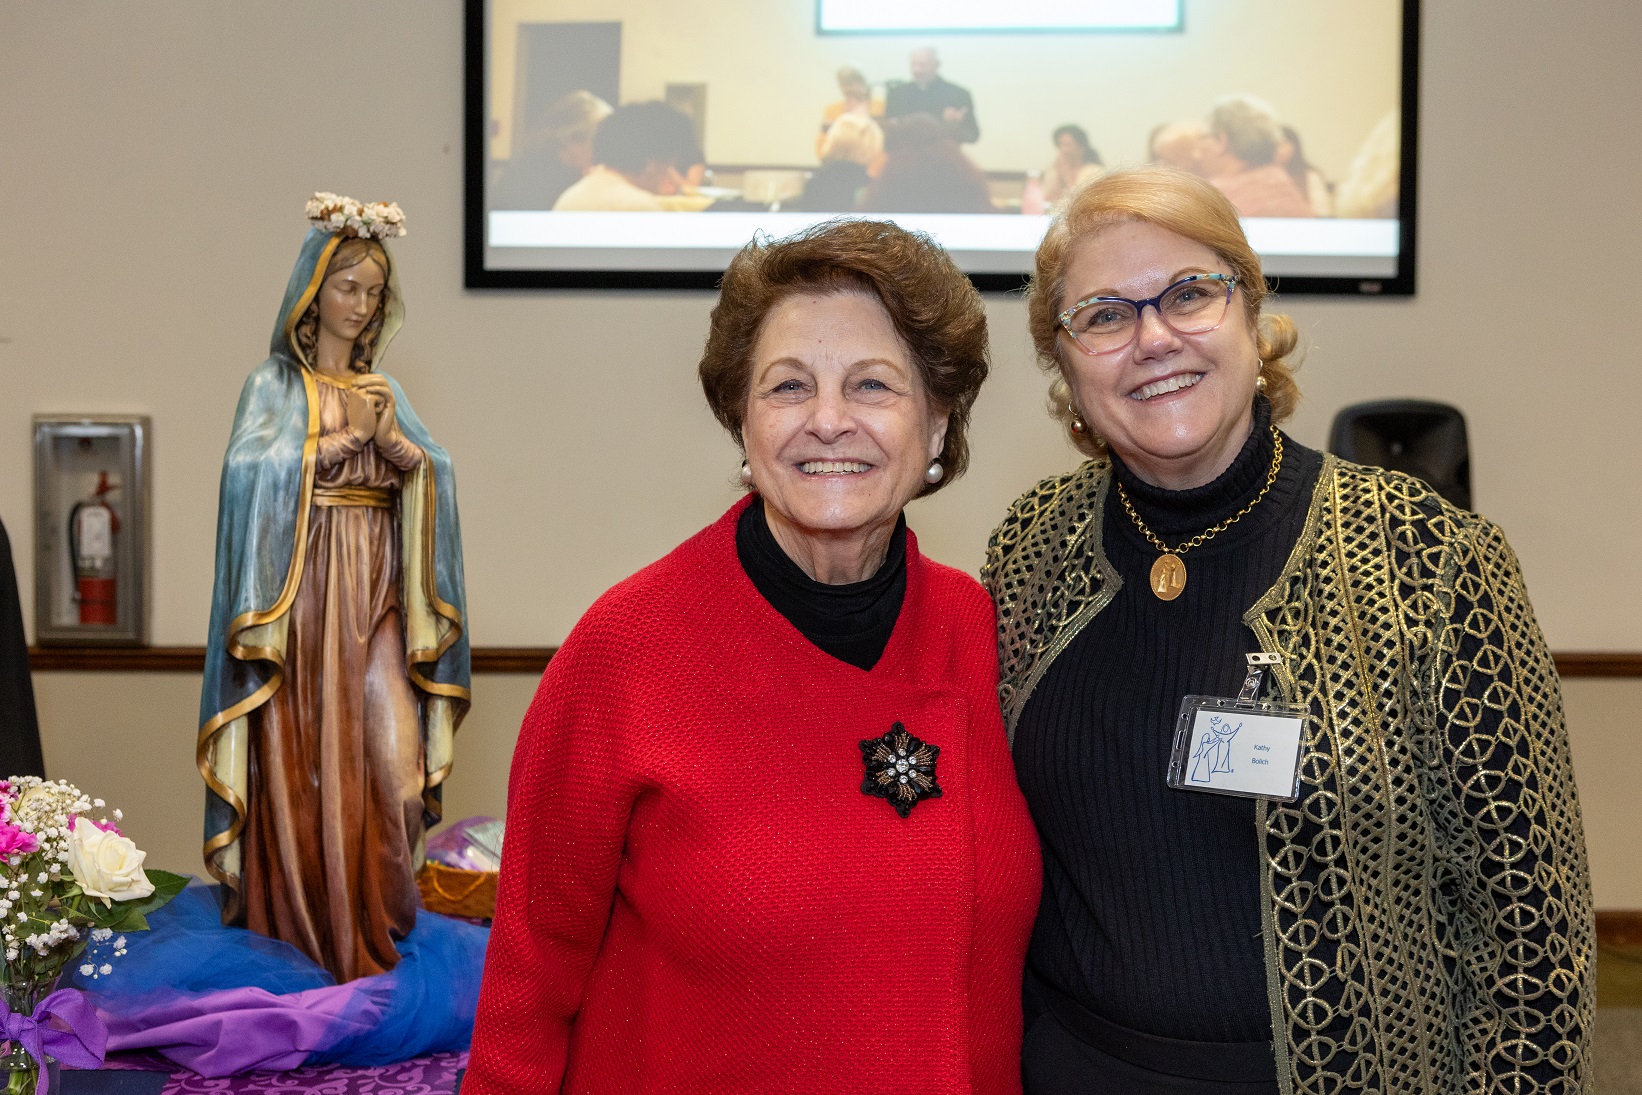 Kathy Bolich (right), coordinator for the St. Petersburg chapter of Magnificat, at the anniversary breakfast